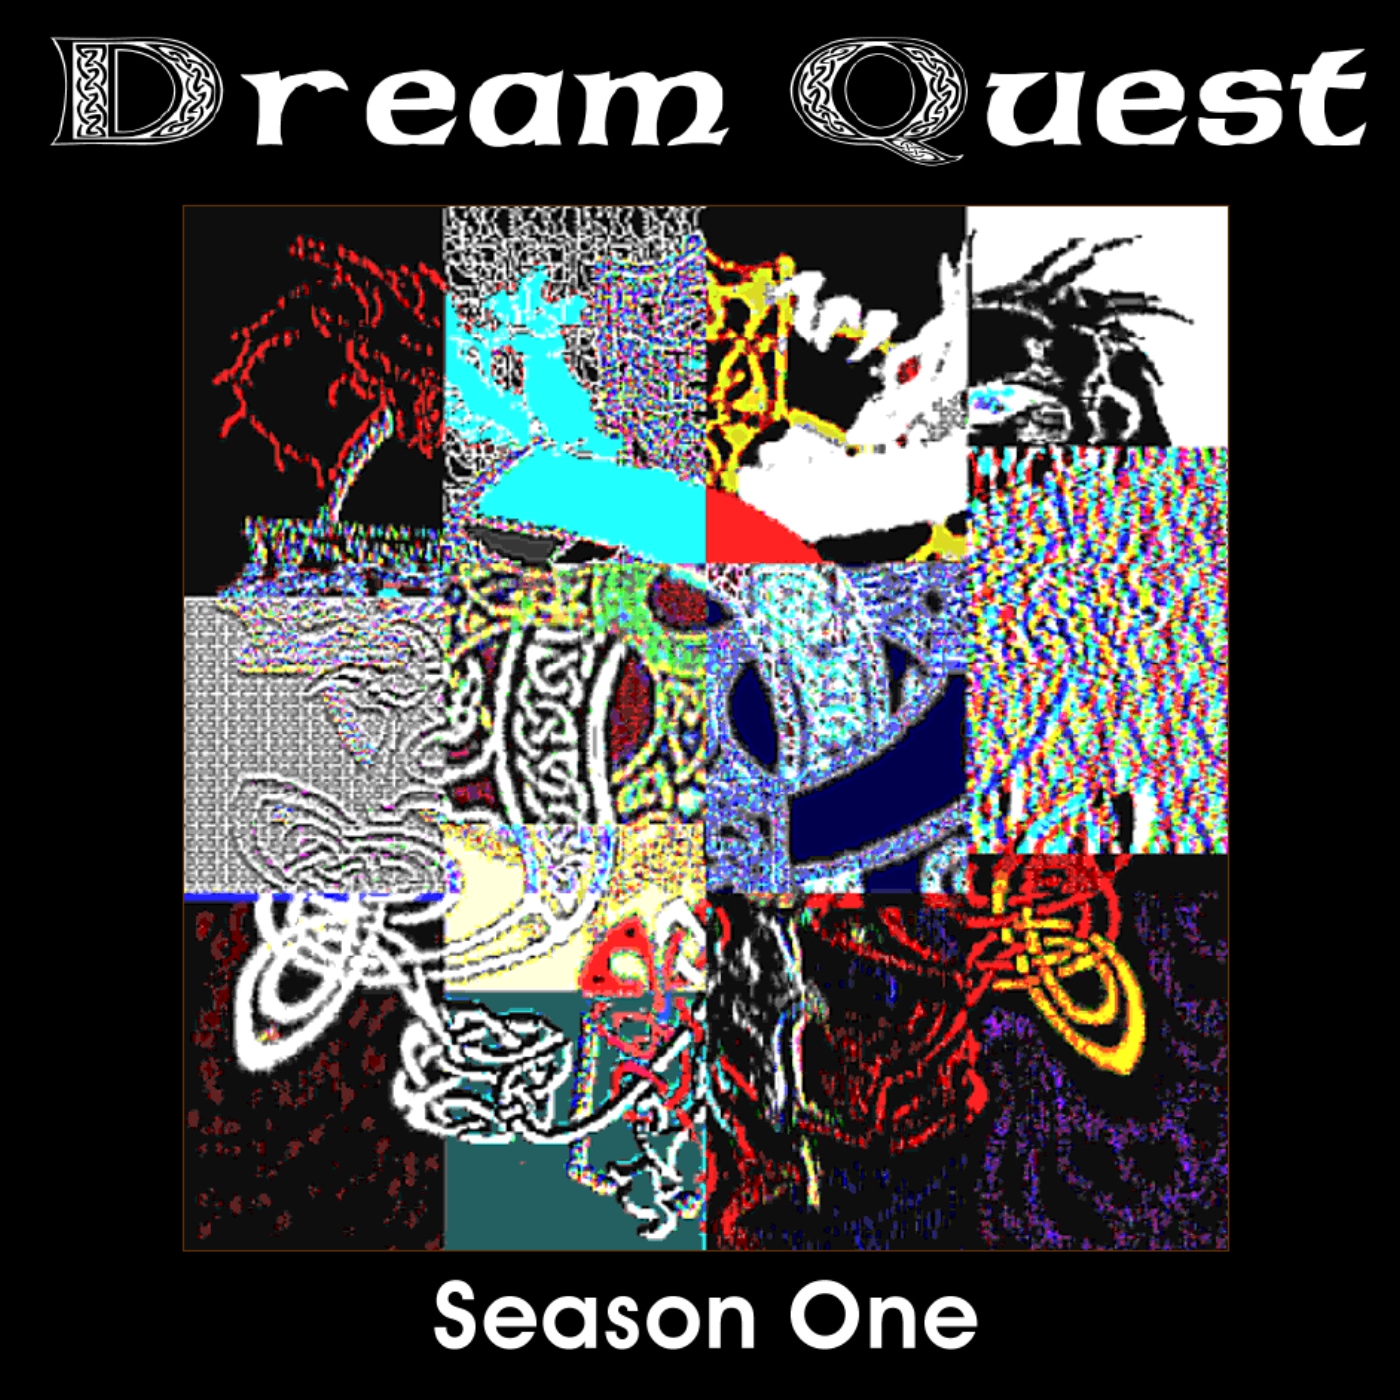 CD cover for "Season One: The Passing of a Loved One" from DJ Dream Quest